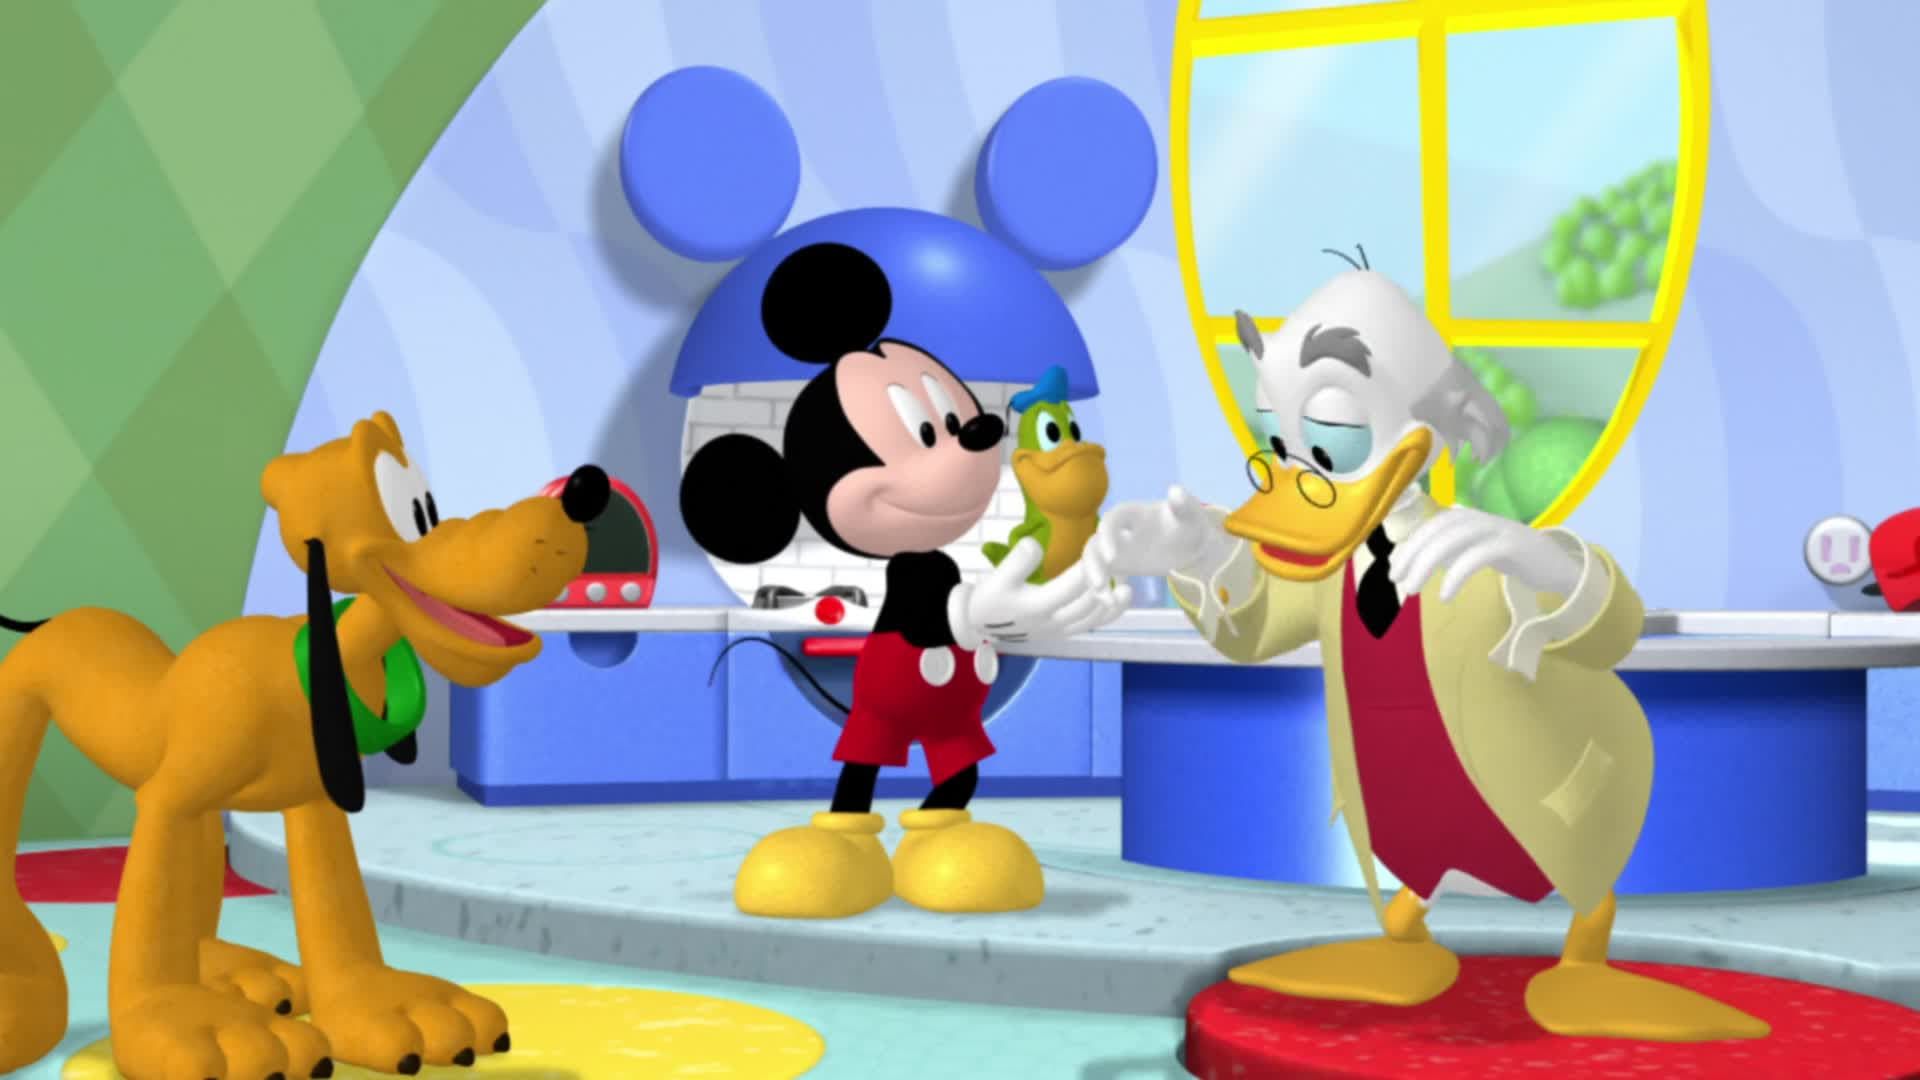 Watch Mickey Mouse Clubhouse Online, Season 1 (2006)